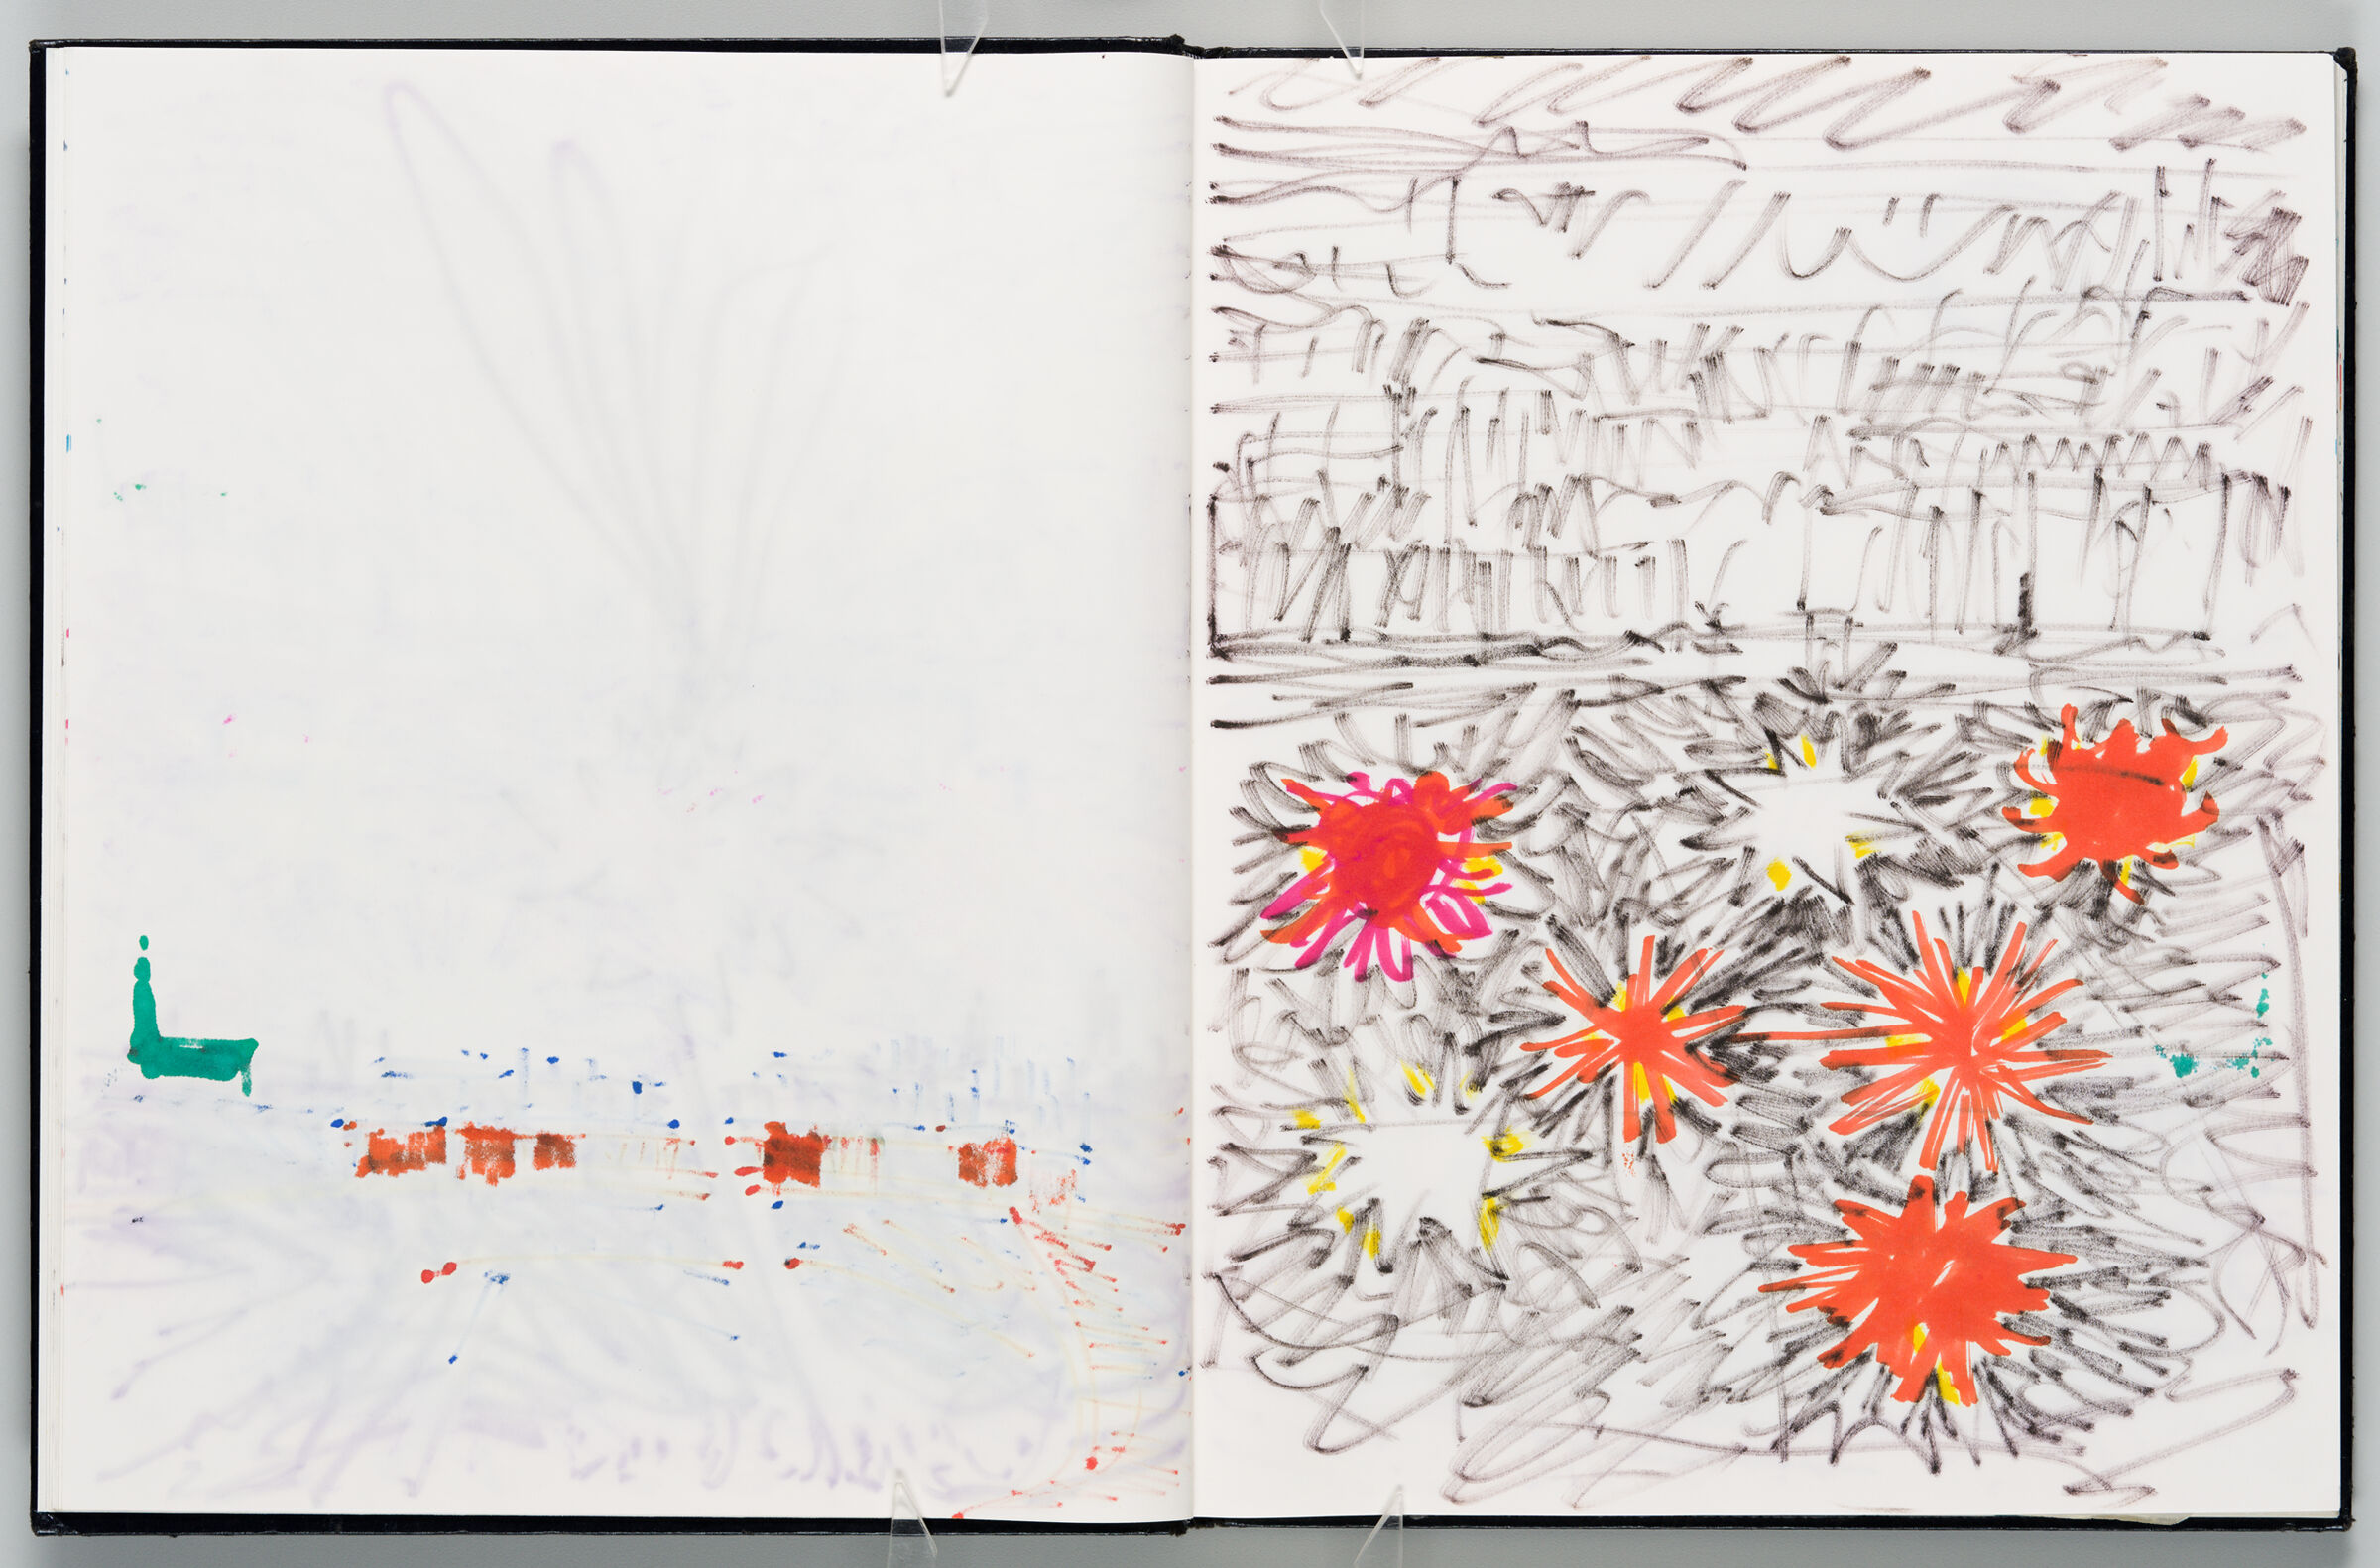 Untitled (Bleed-Through Of Previous Page With Color Transfer, Left Page); Untitled (Star Burst Designs For Installation At Obscure In Quebec City, Right Page)